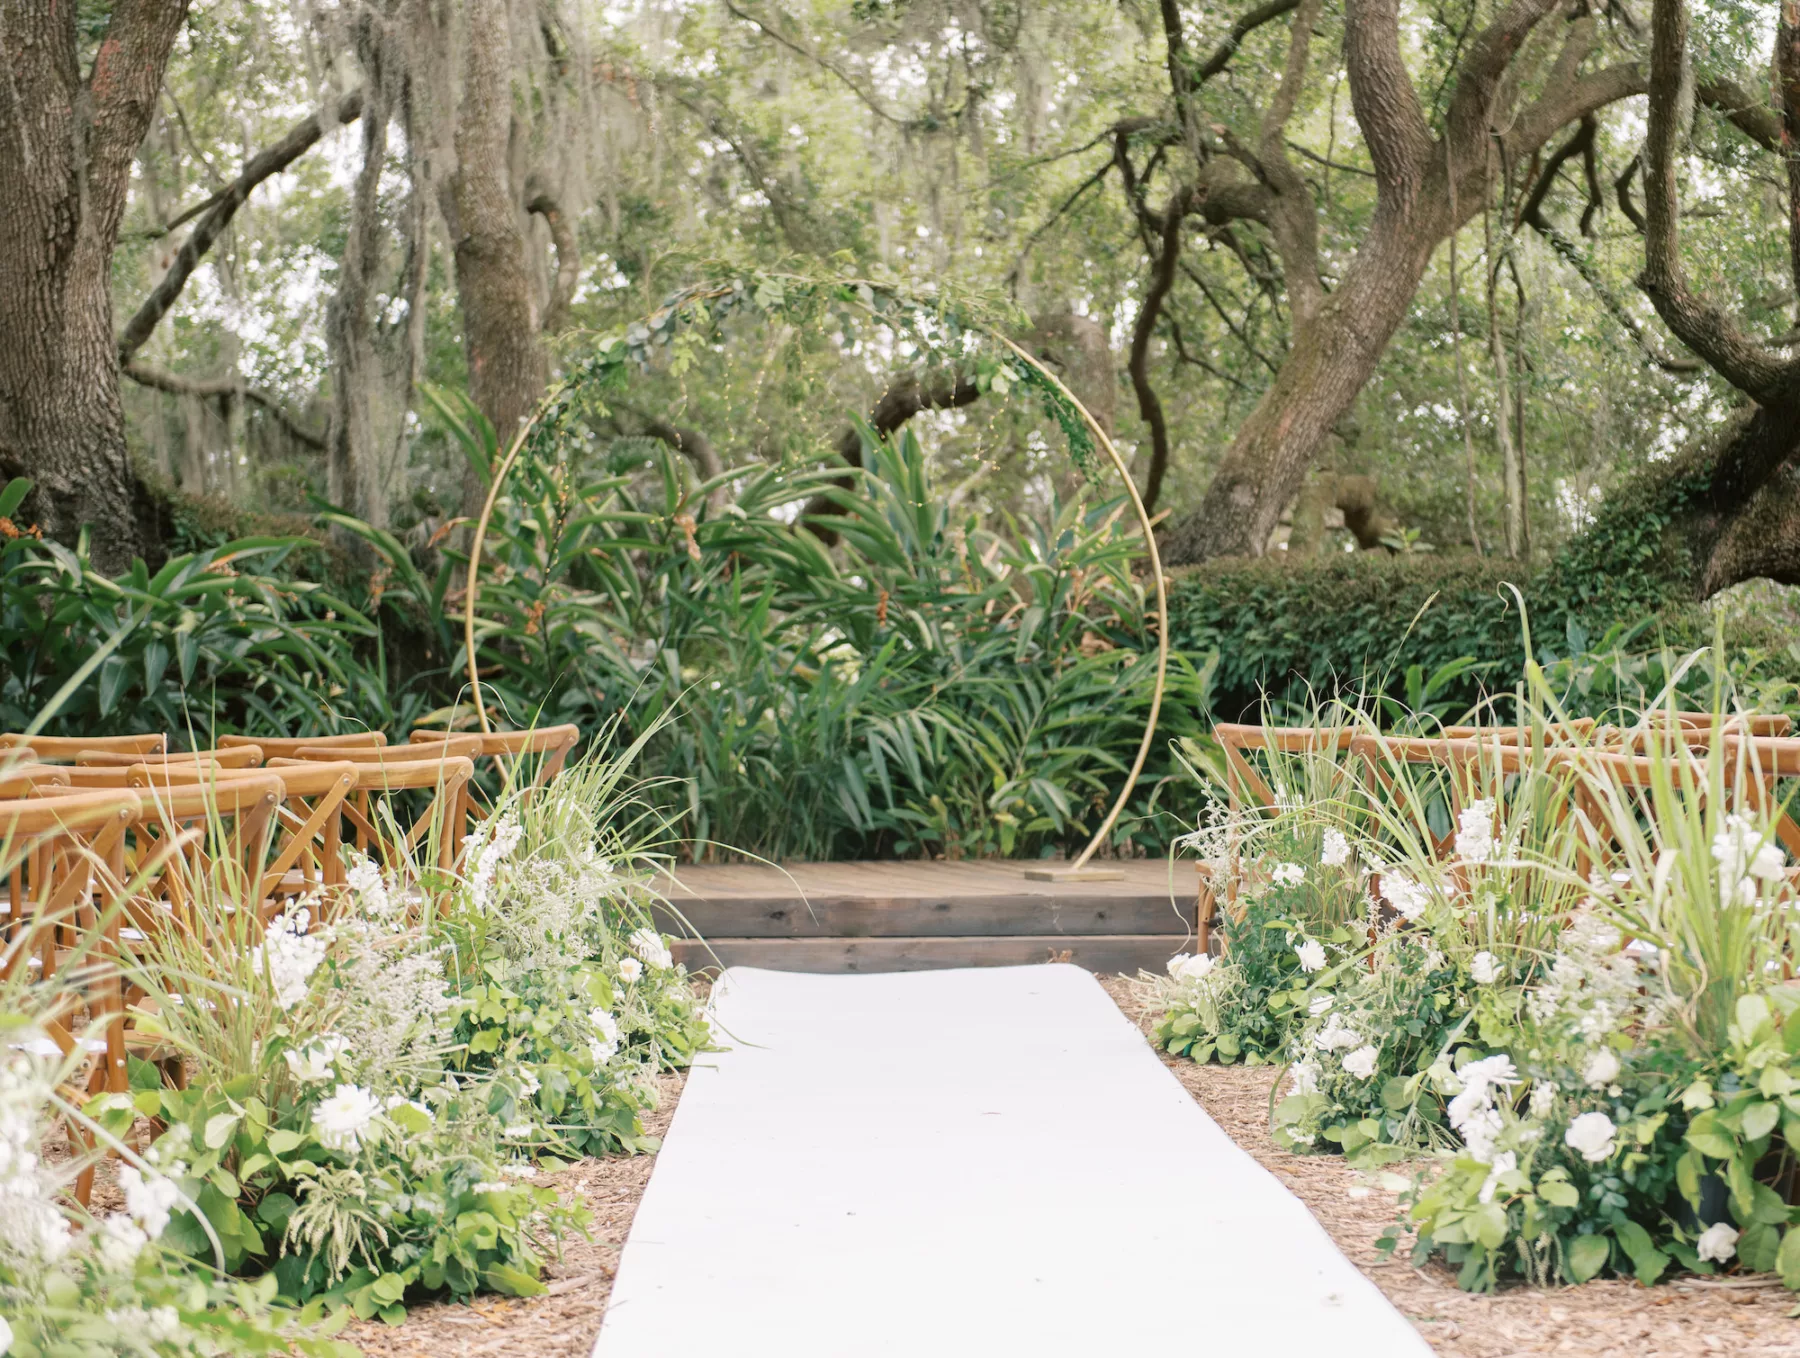 The Broken Oak Whimsical Wedding Ceremony Inspiration | Gold Hoop Arch Ideas | White Snapdragons and Greenery Aisle Decor | Tampa Bay Event Venue Mill Pond Estate